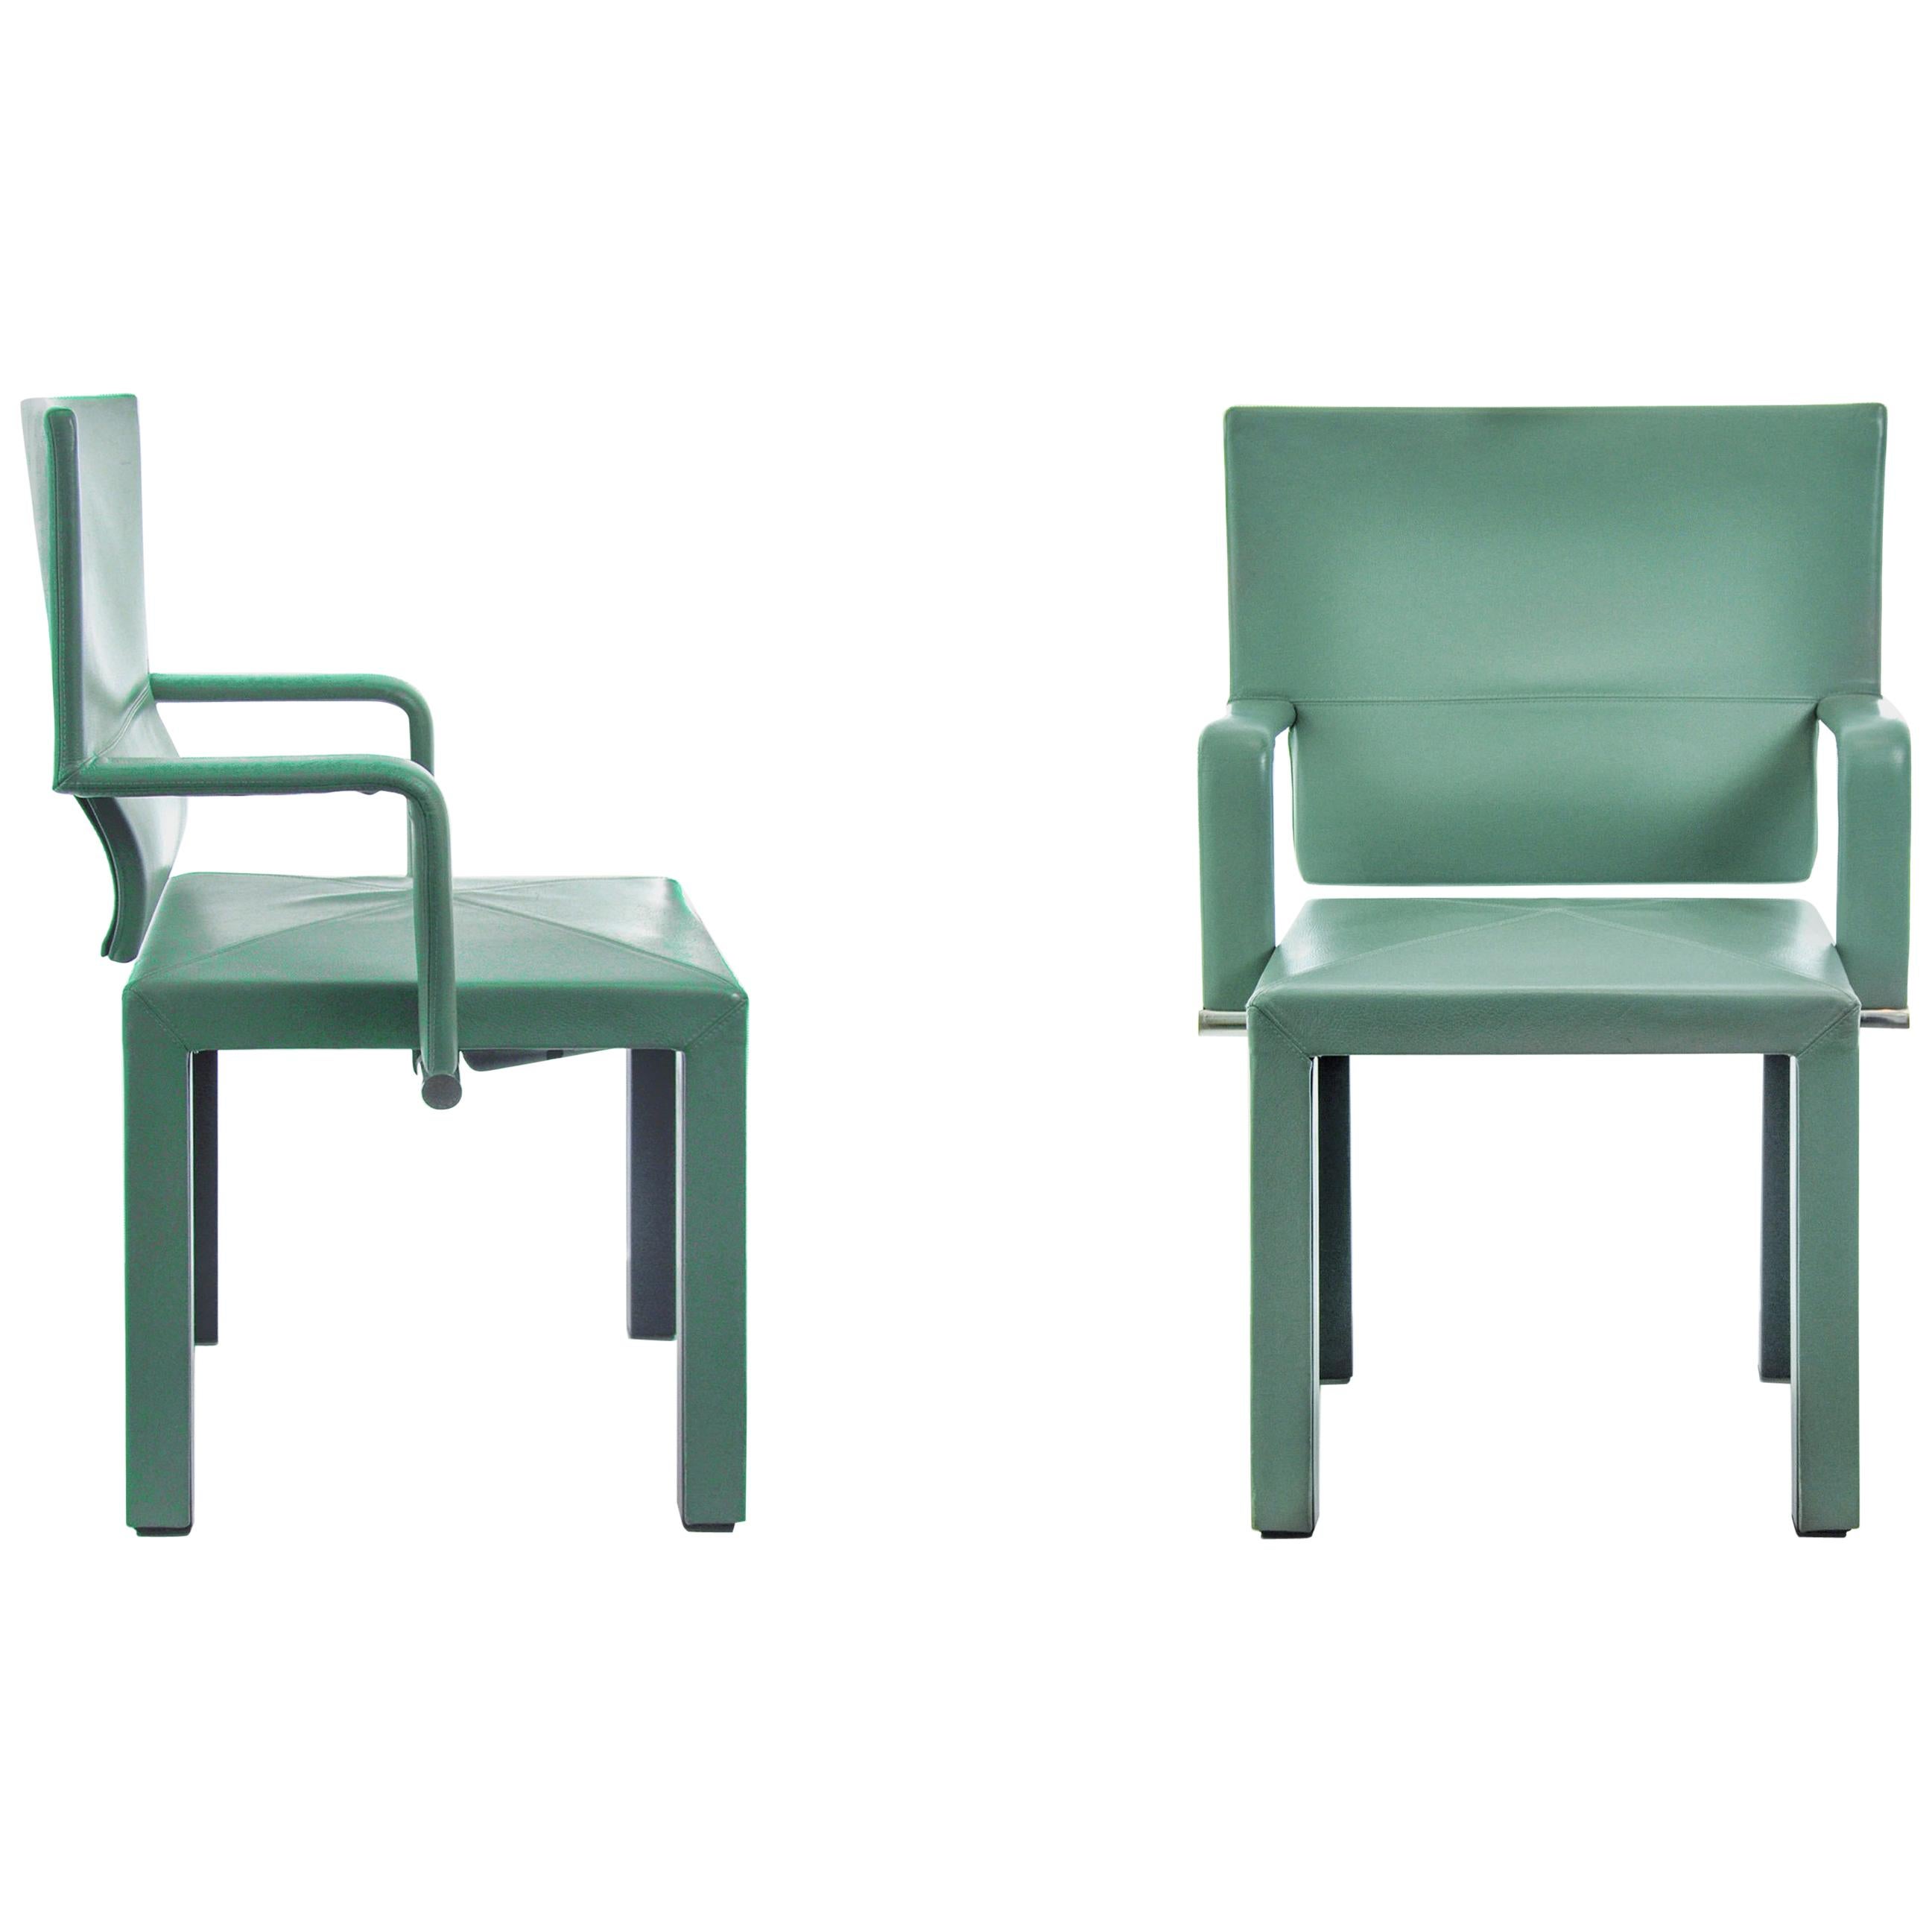 Set of 2 Mint-Colored Italian Armchairs by Paolo Piva for B&B Italia, 1990s